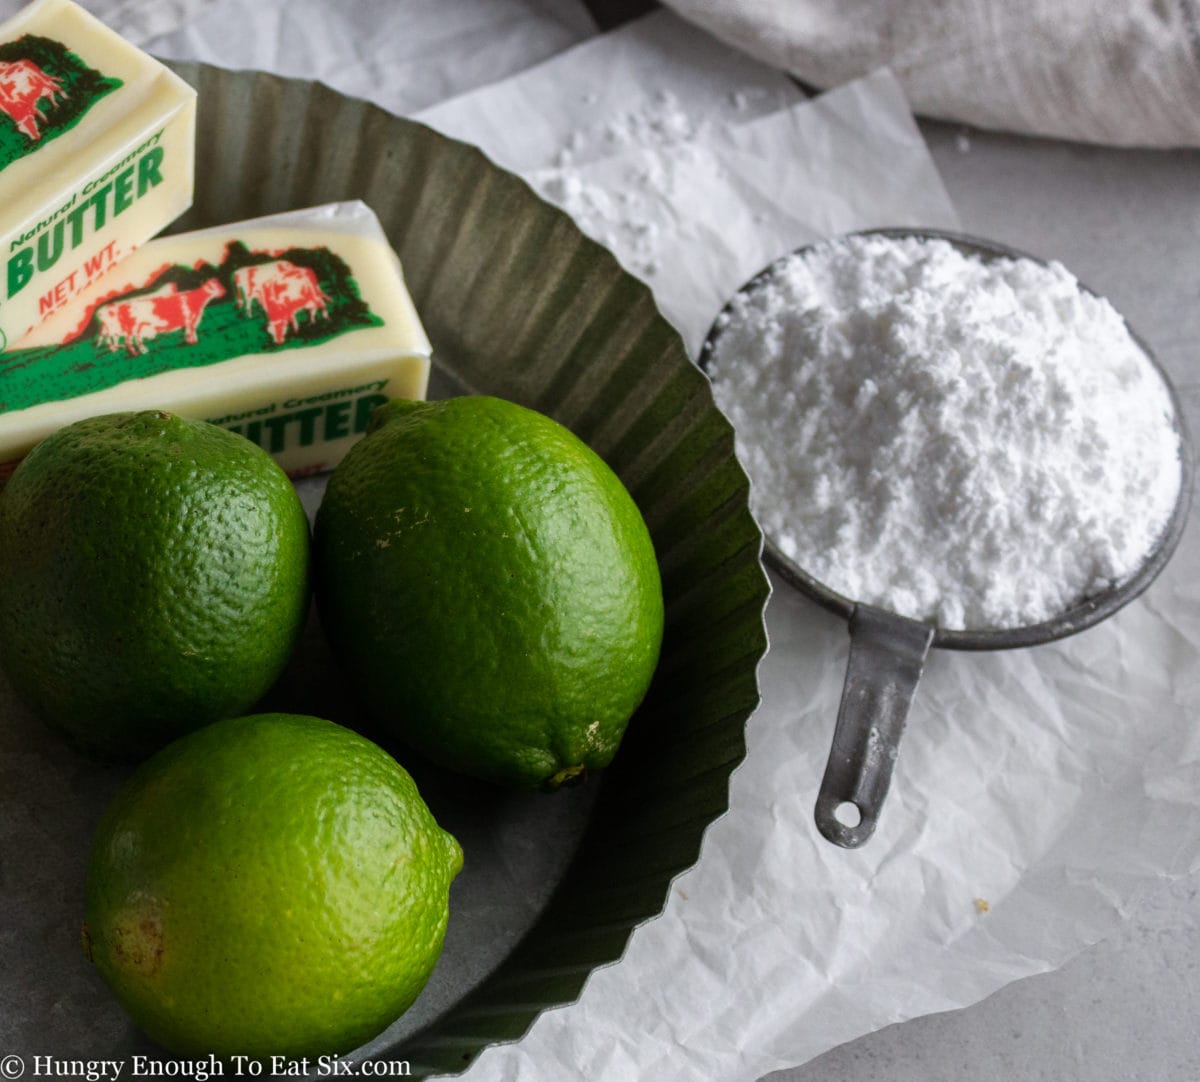 Butter, limes, and confectioner's sugar